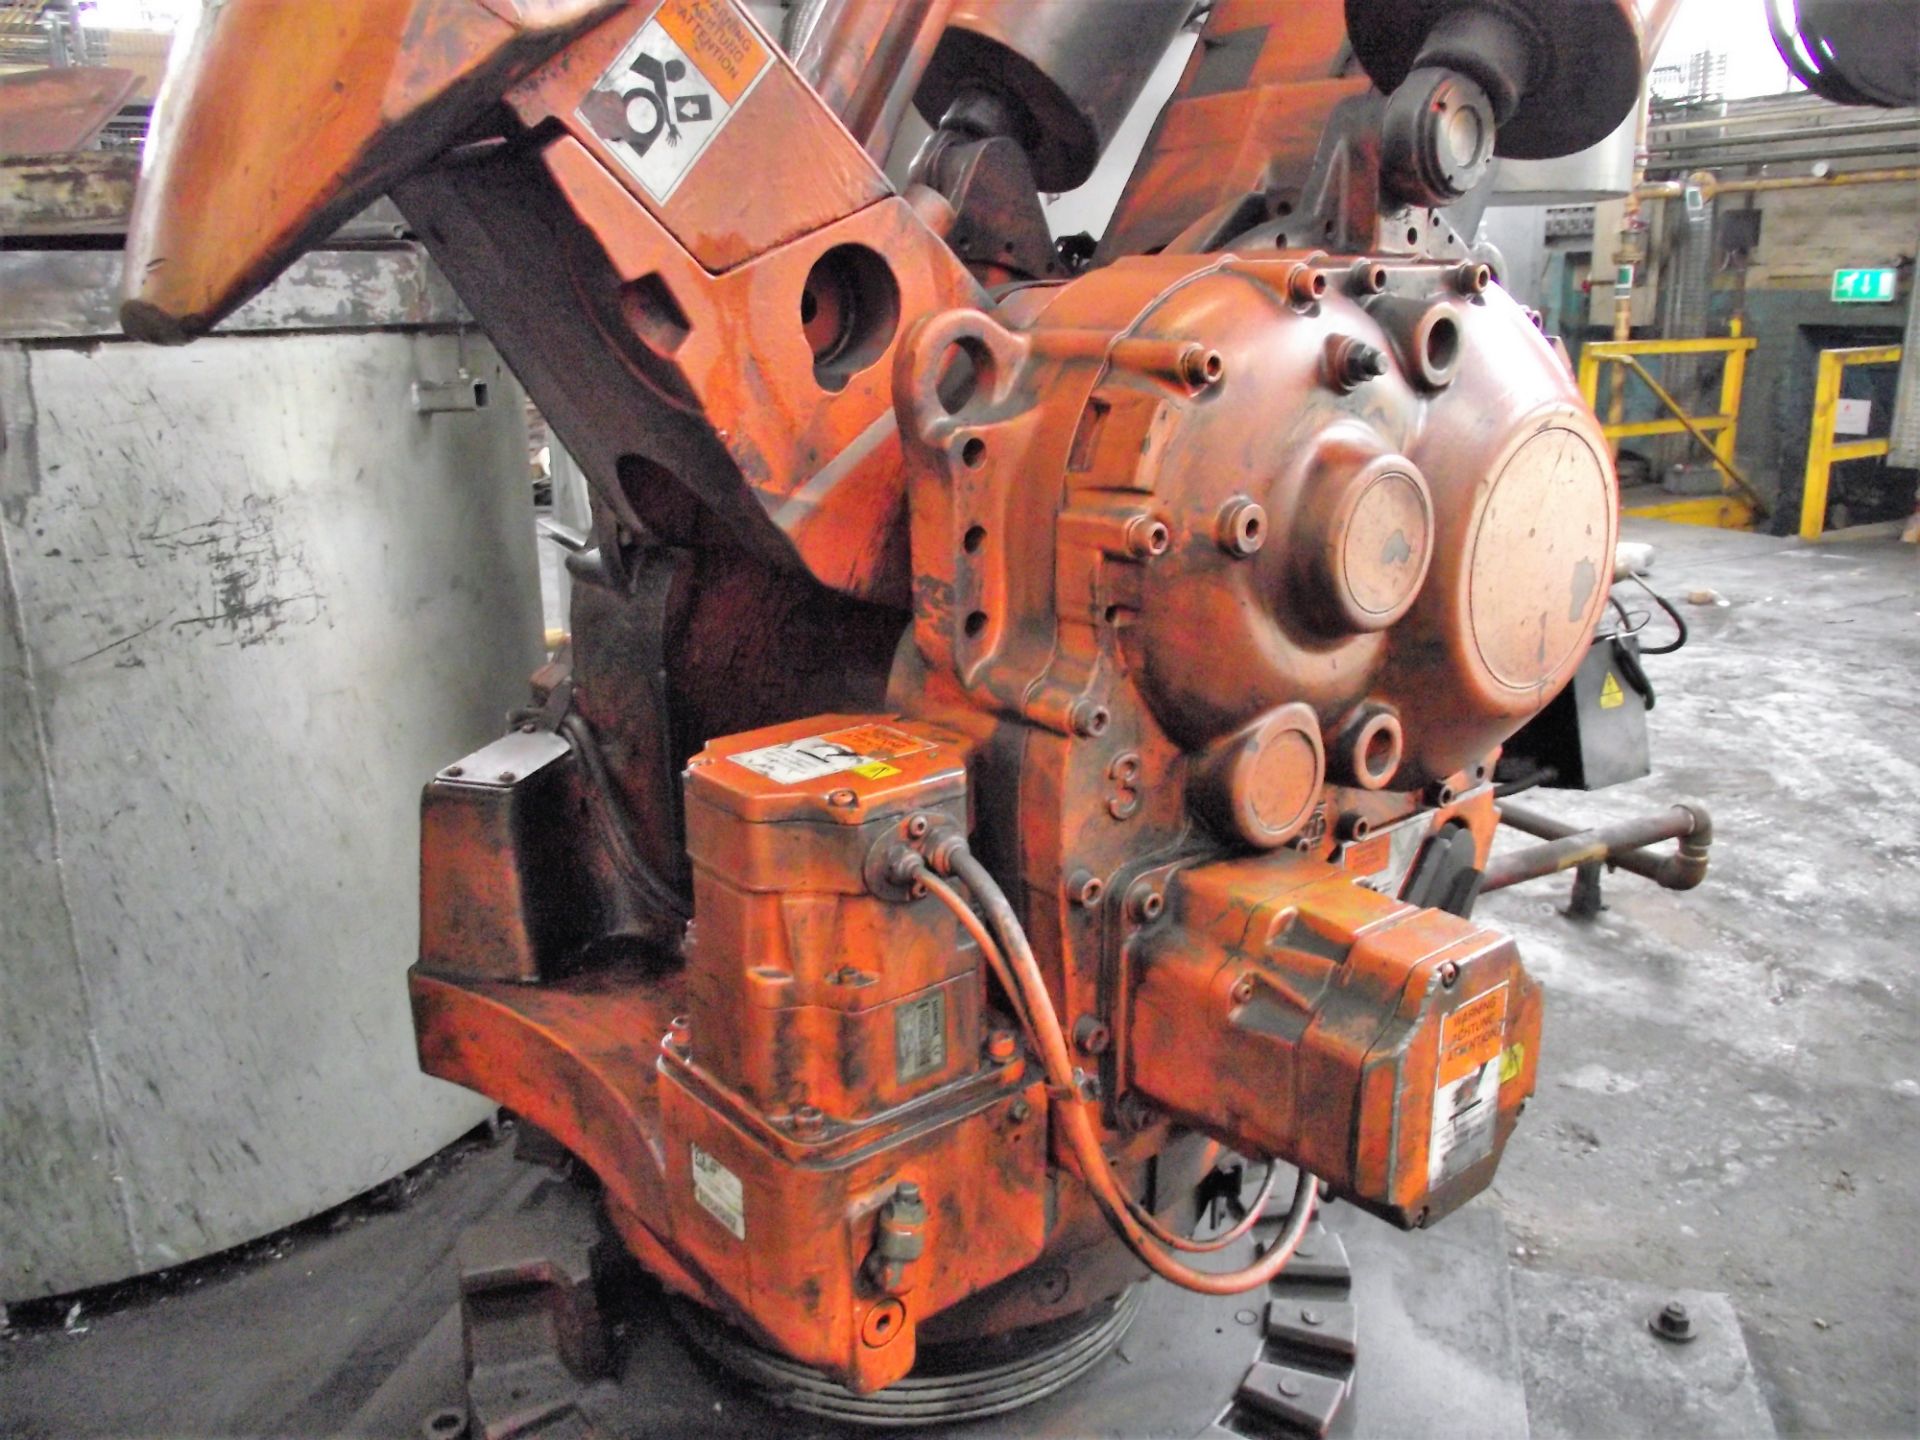 ABB IRB 6400R M2000 Foundry Plus Robot cw Gripper Attachment - Image 4 of 19